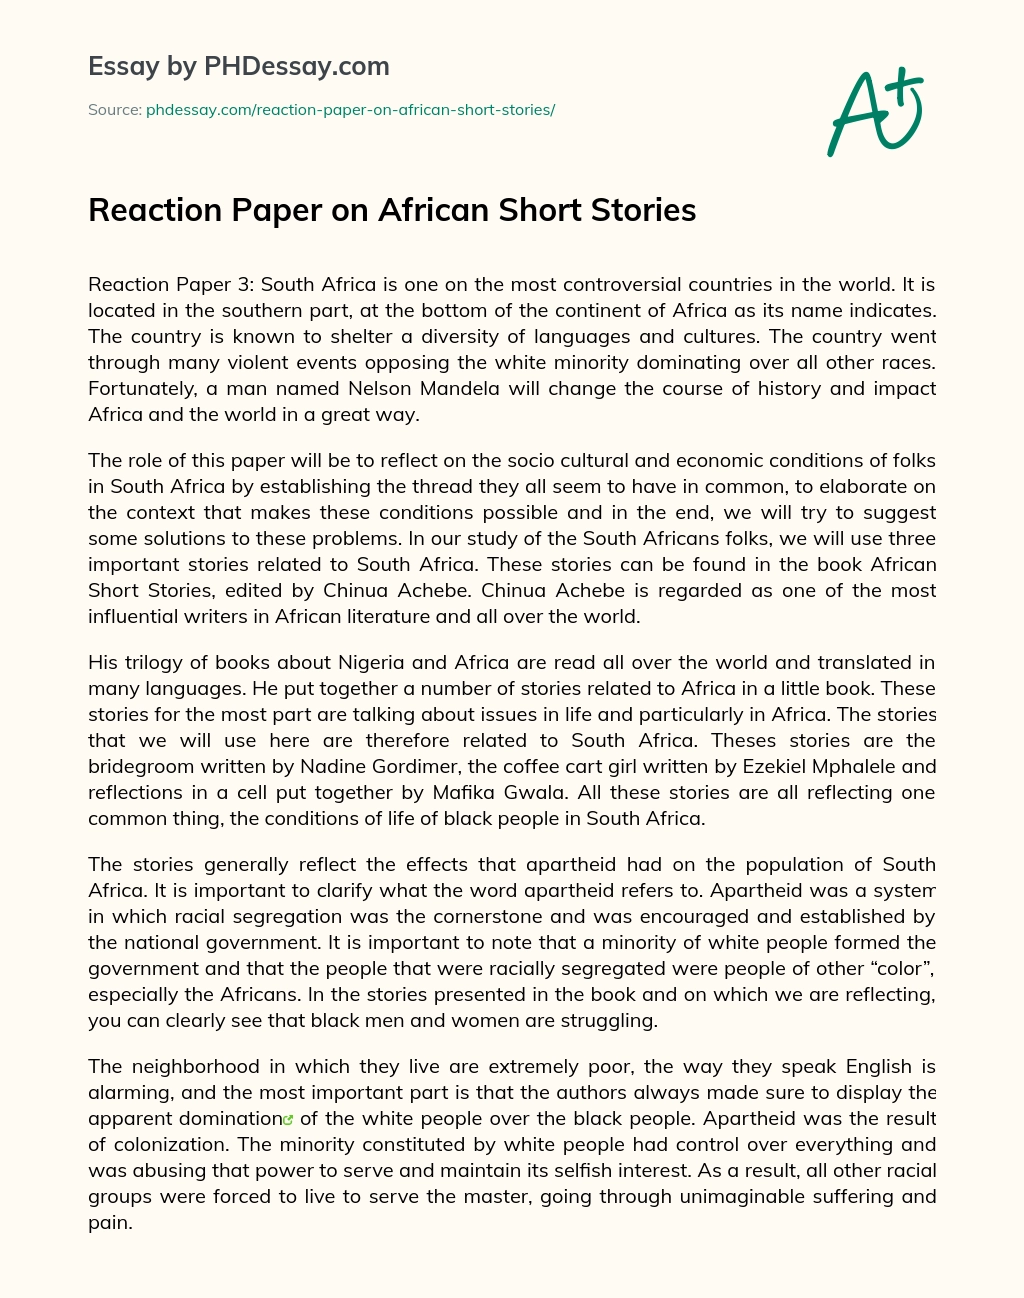 Reaction Paper on African Short Stories essay